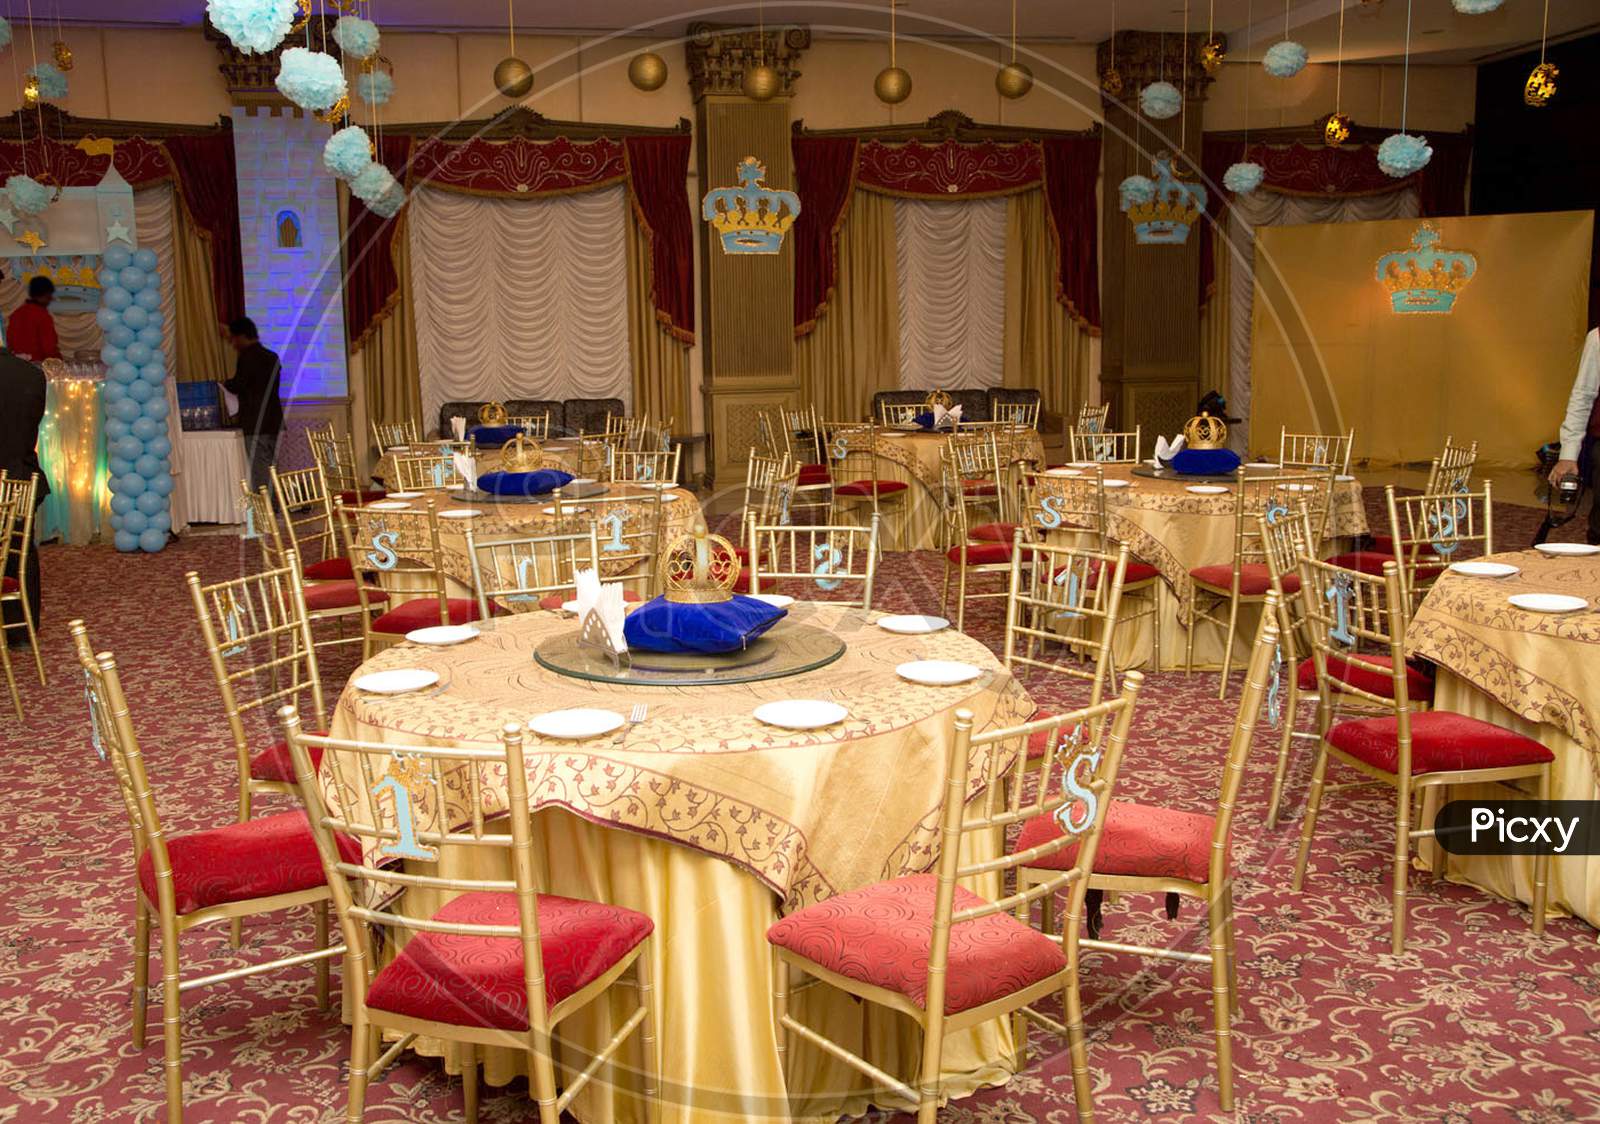 Restaurant interior decoration with seating chair and table, part of hotel for party and celebration.